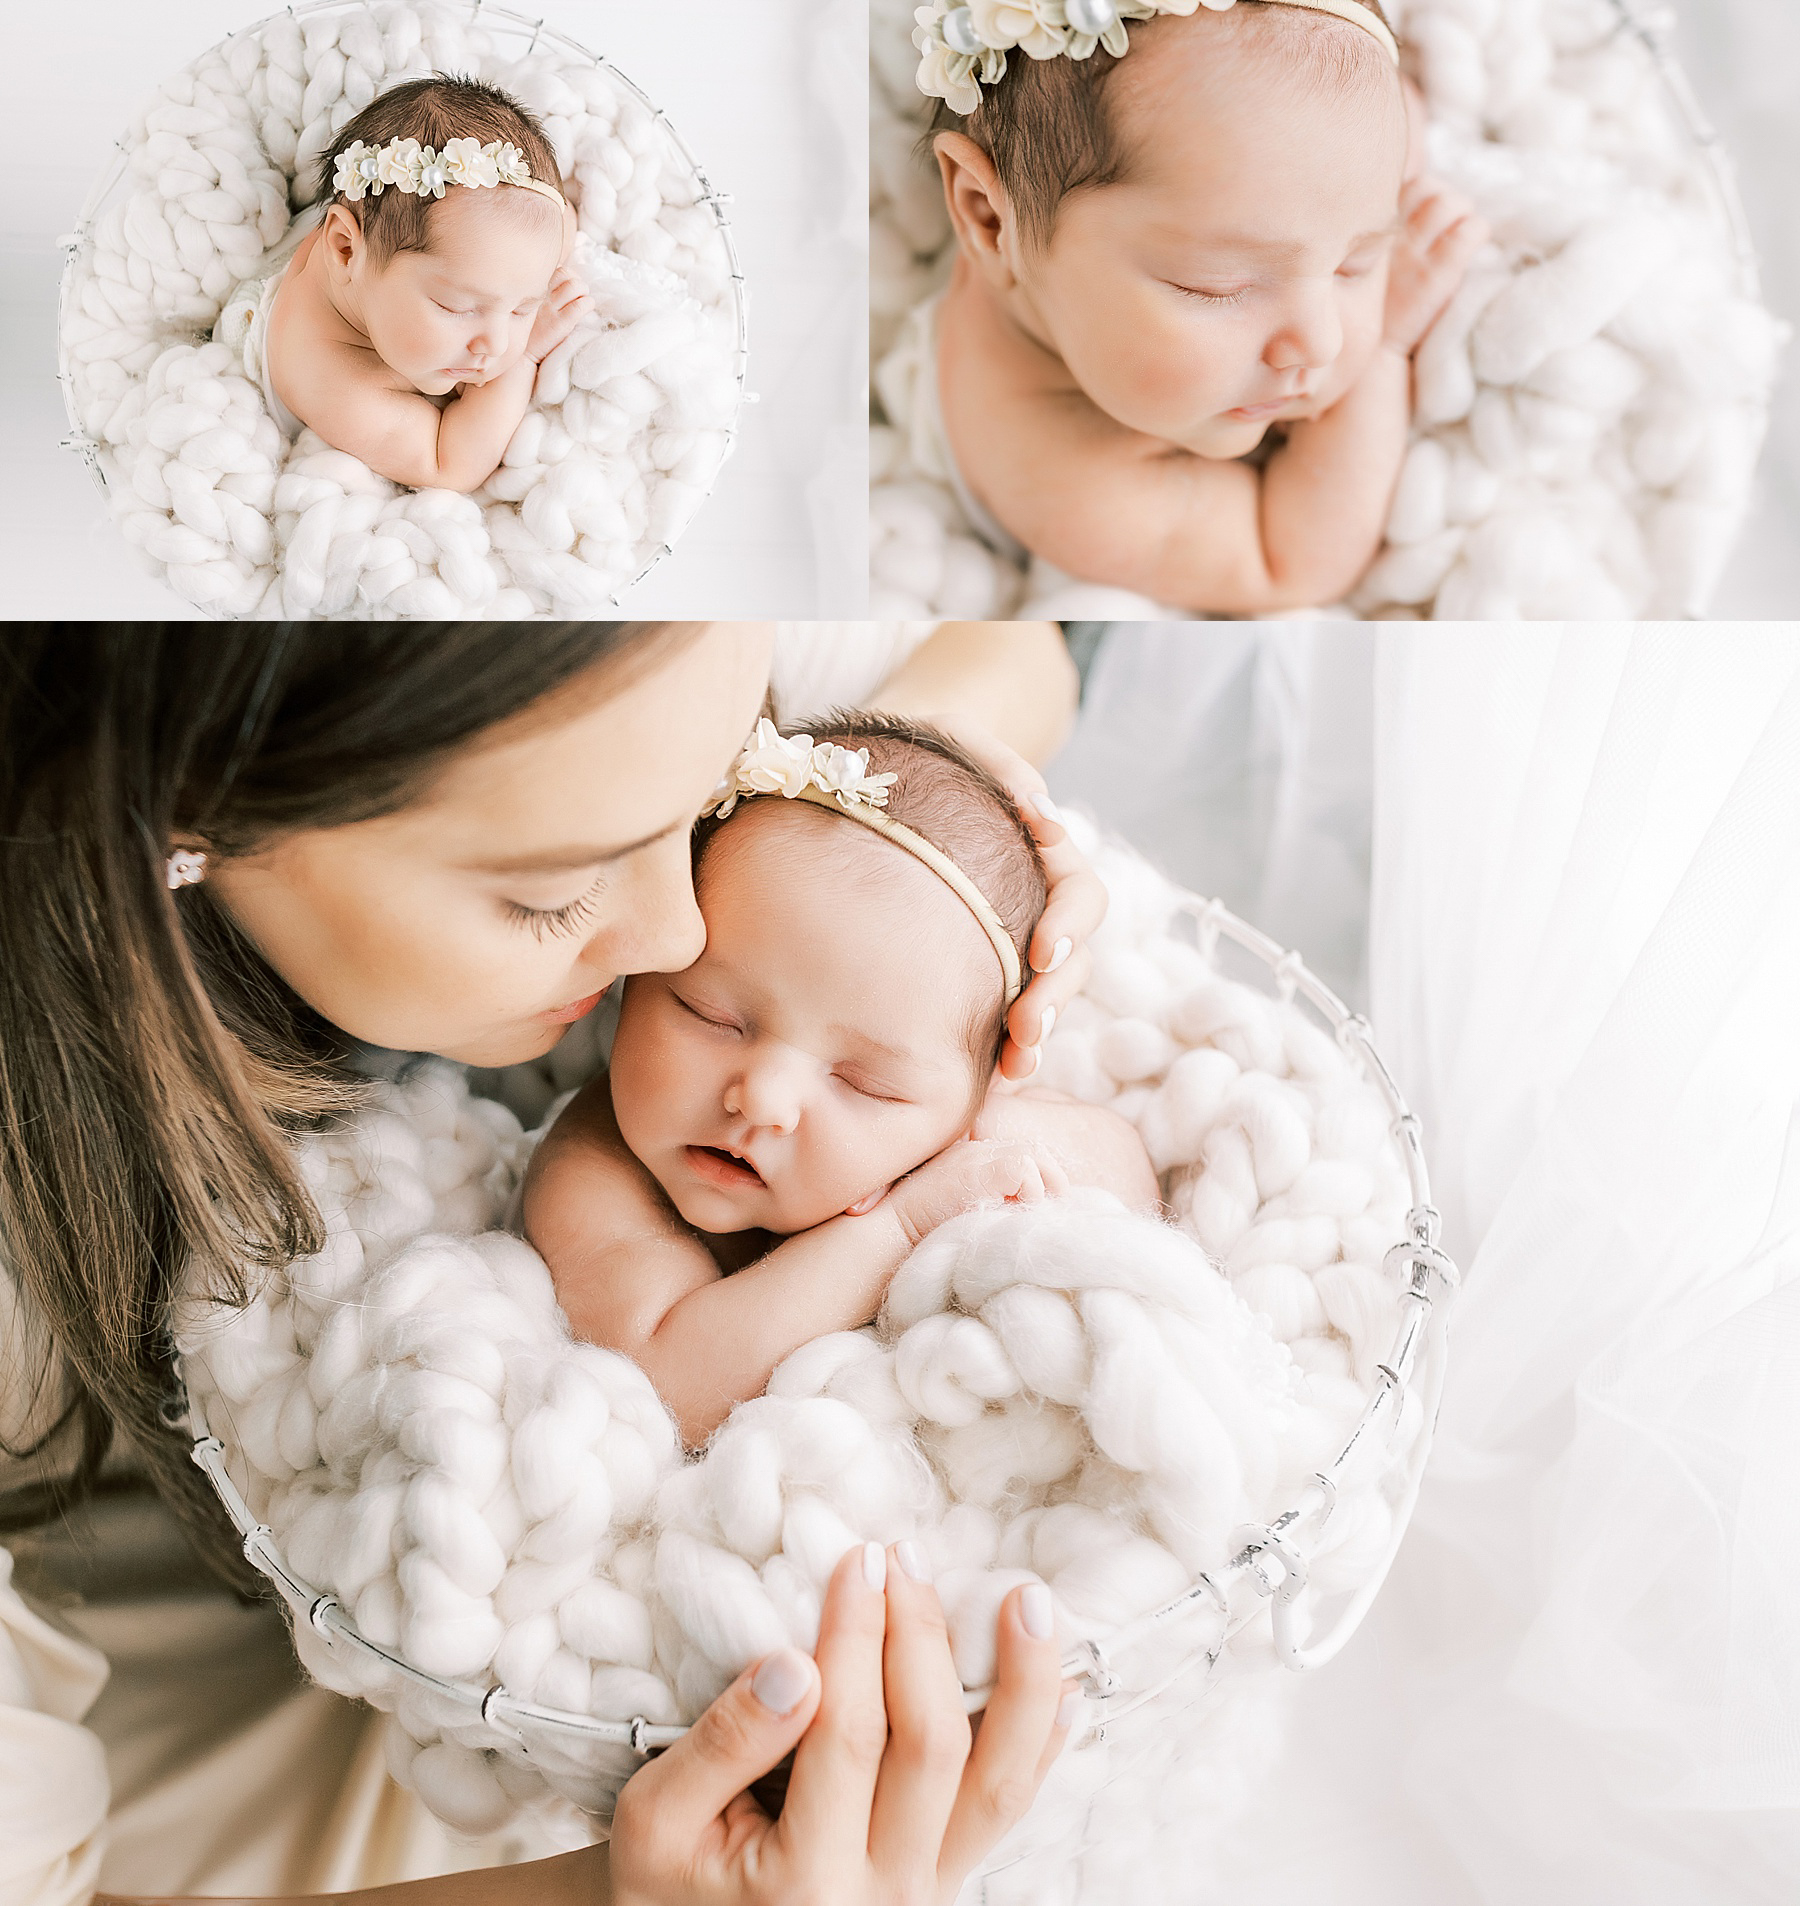 collage of posed newborn portrait session images all white with newborn baby girl in wire basket with white chunky knit blanket